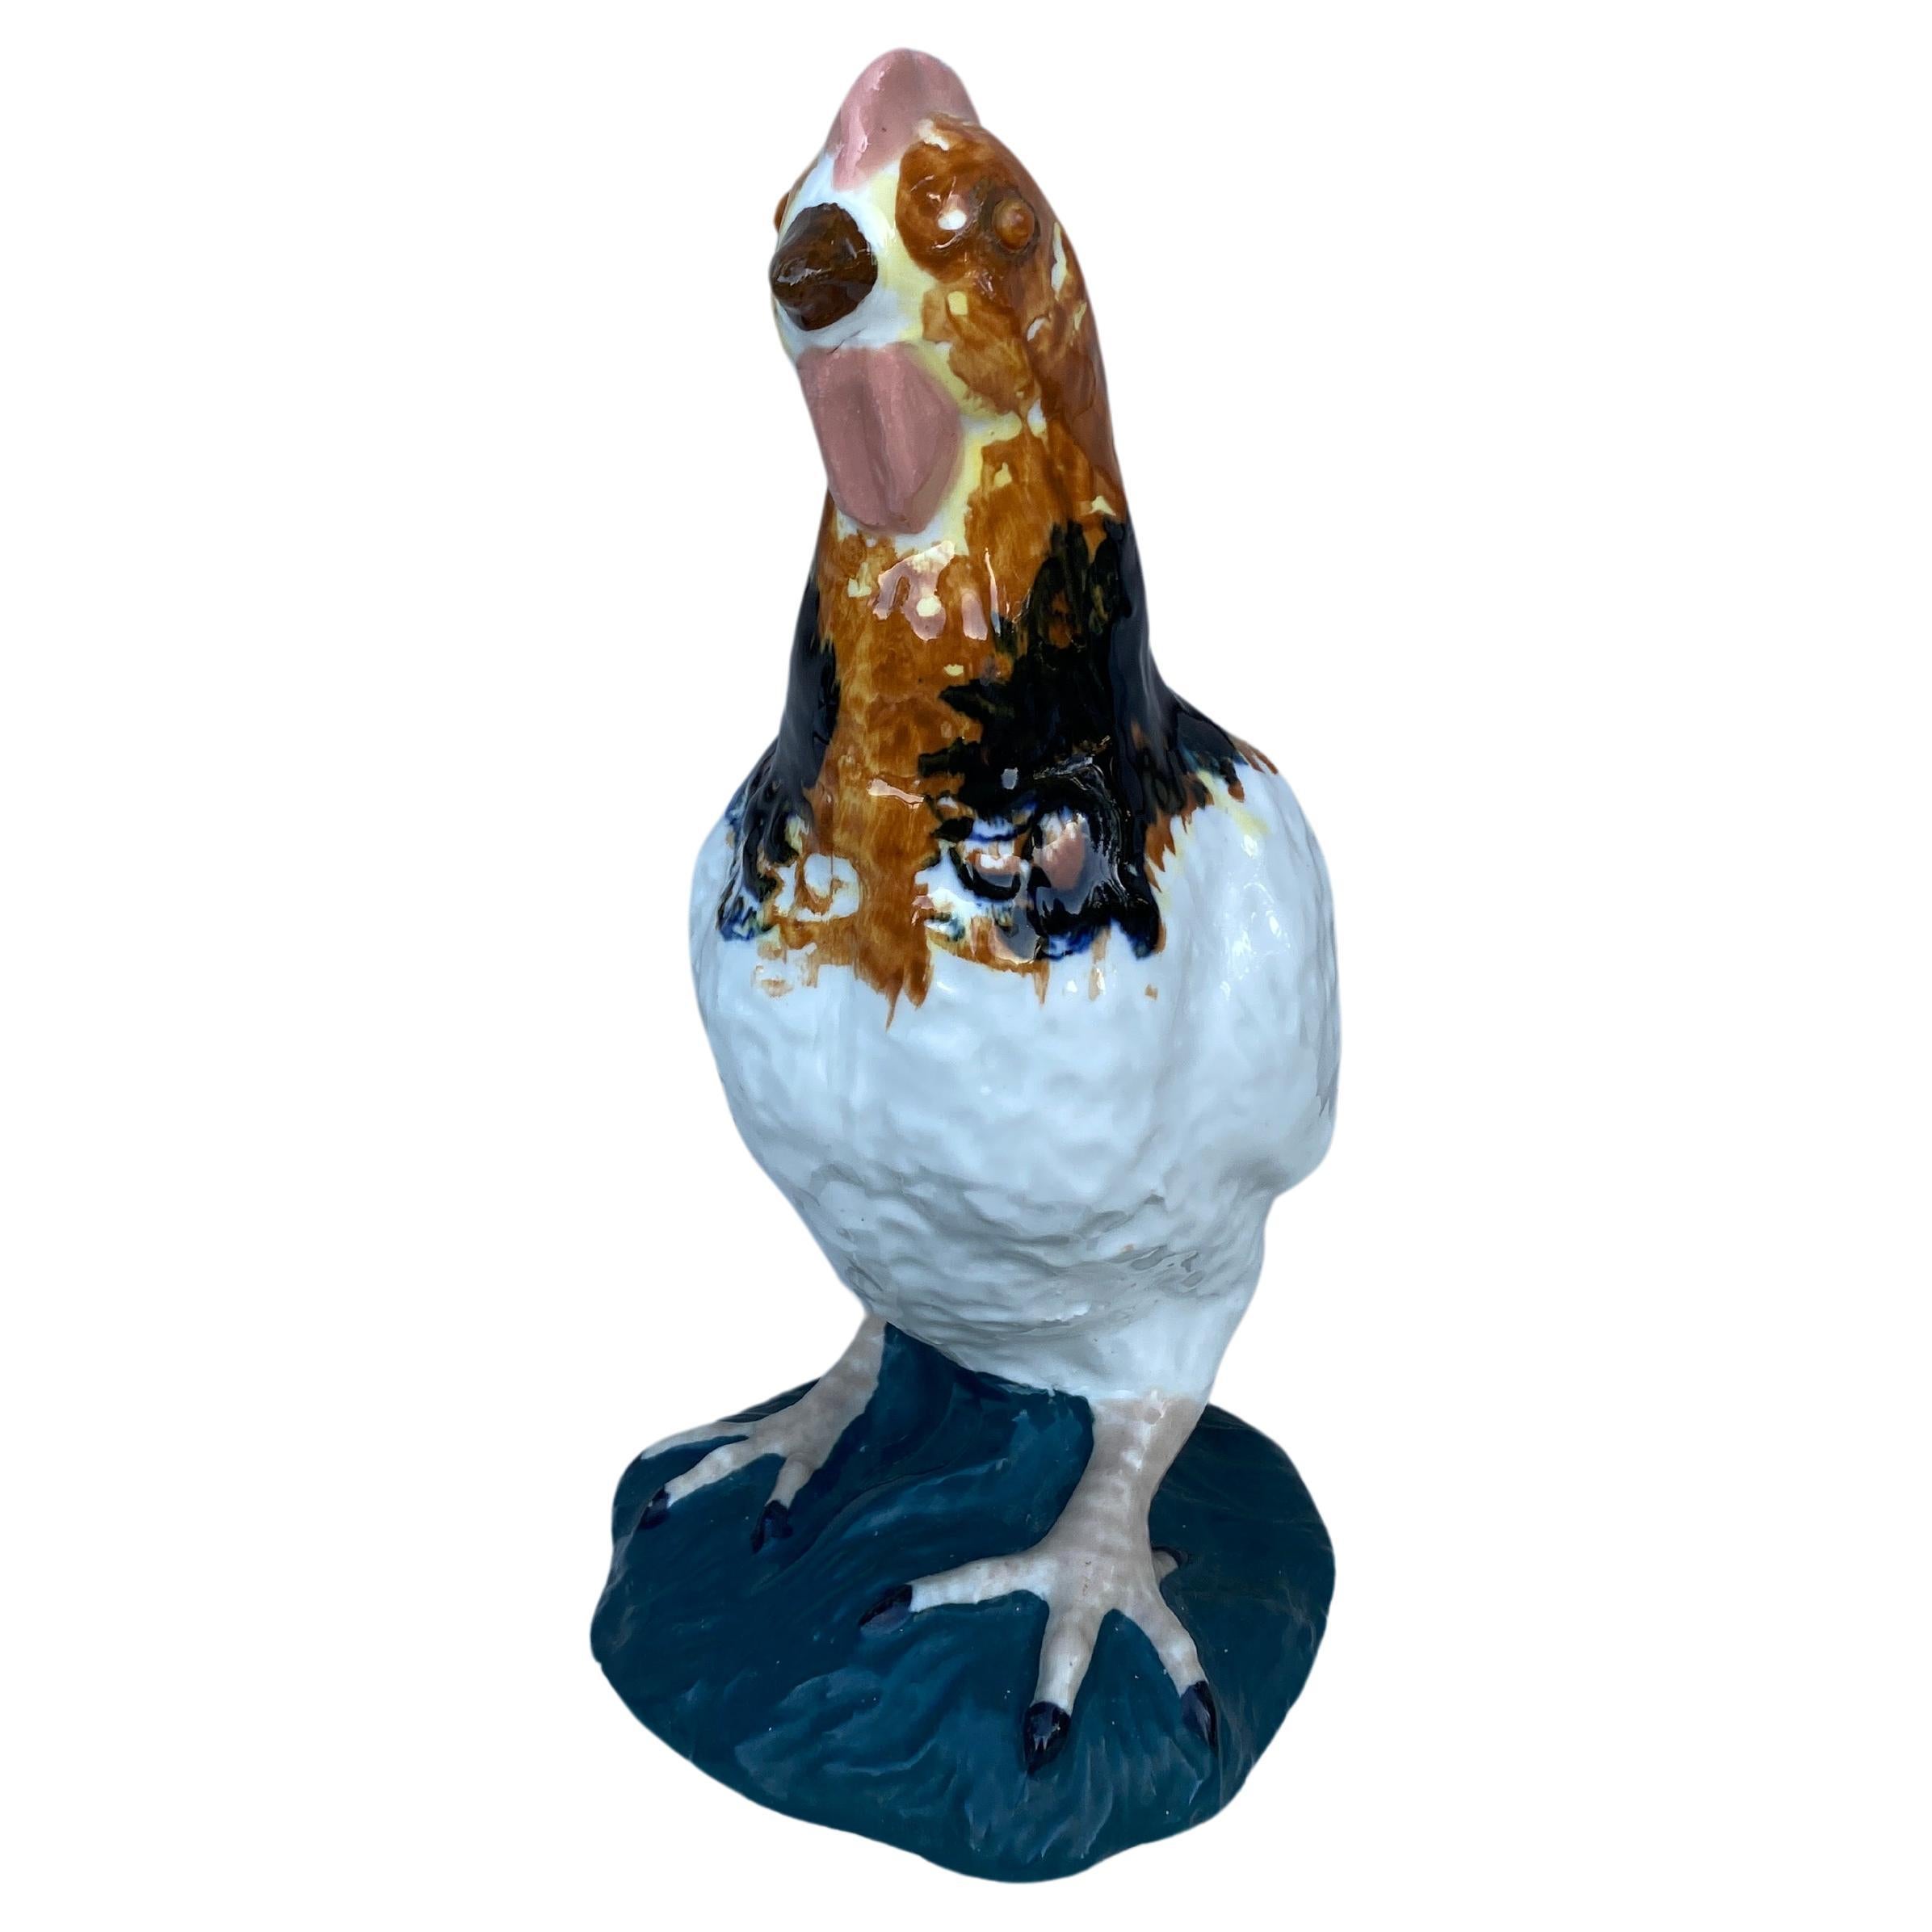 French rustic Majolica Porcelain Hen Circa 1930.
H / 11.5 inches.